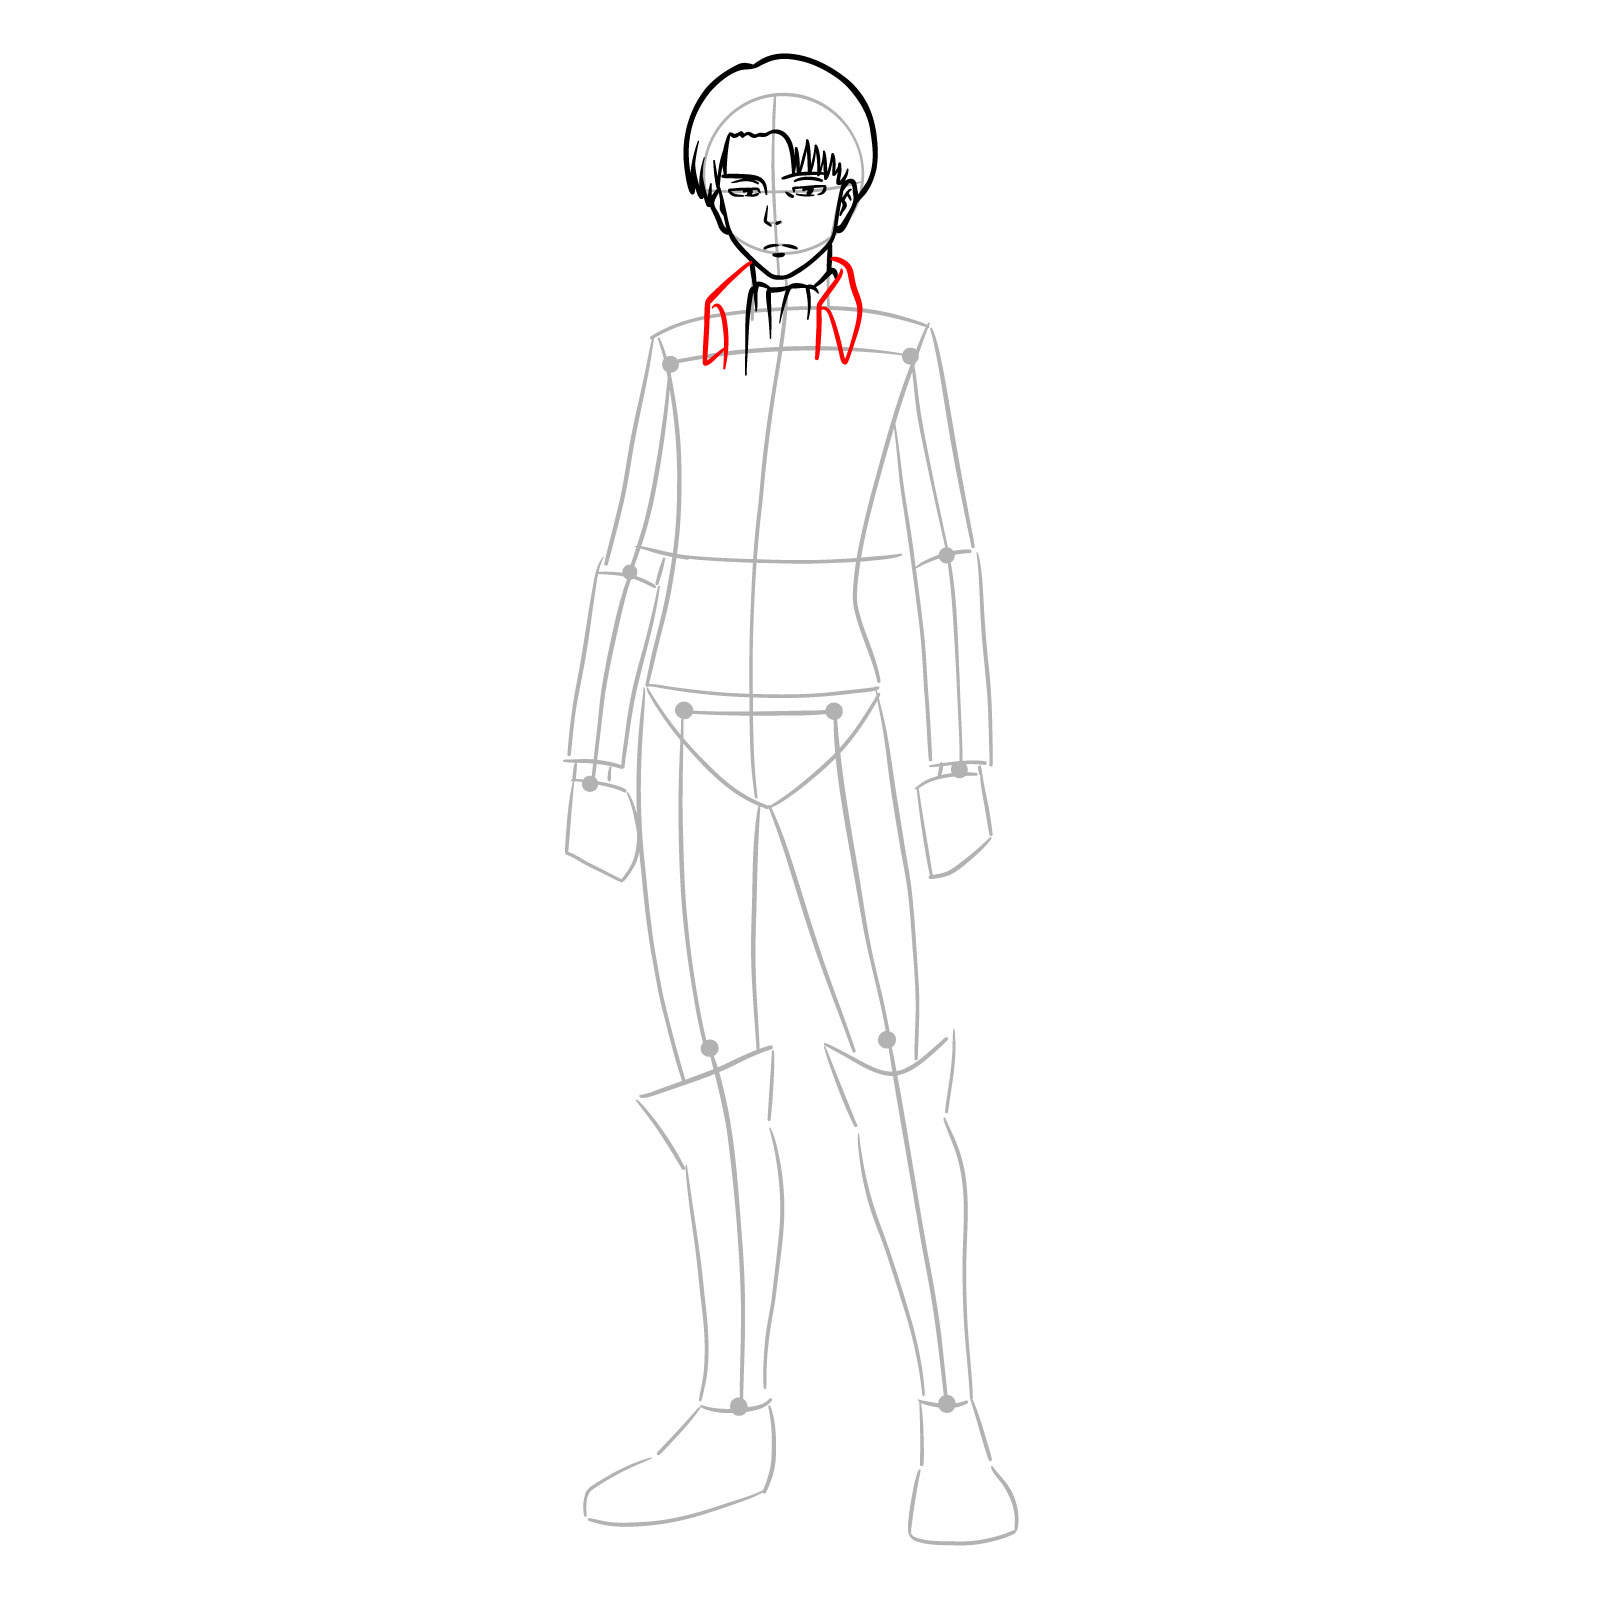 Collar of the jacket in Levi Ackerman's full body drawing guide - step 10